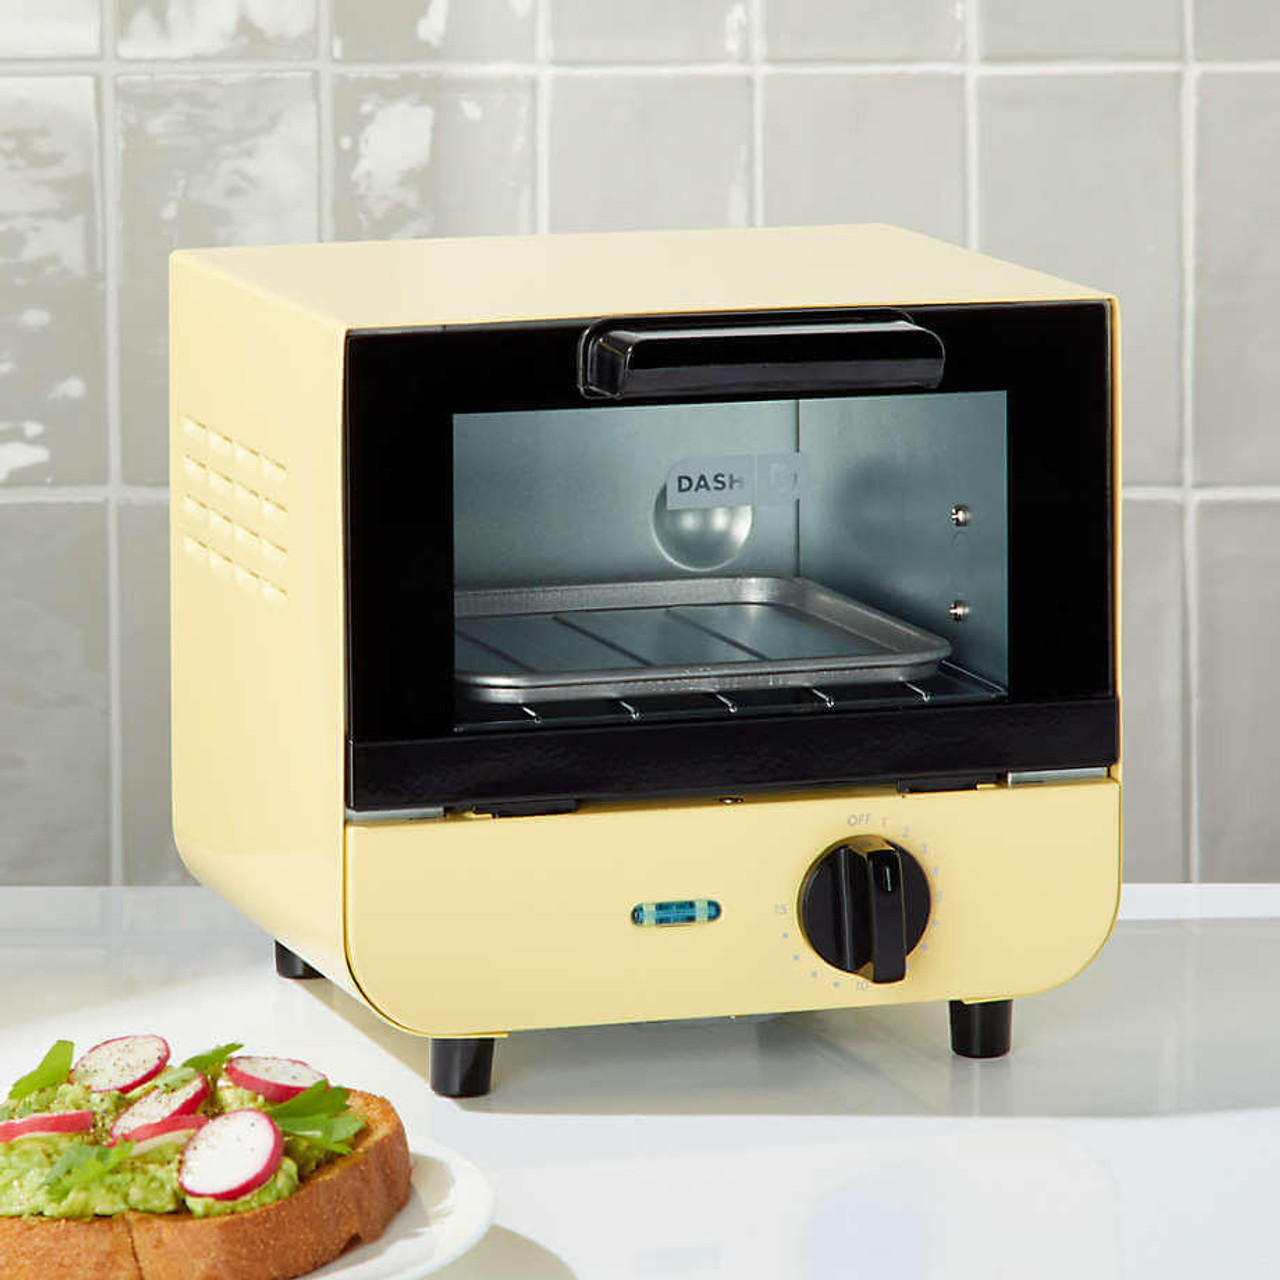 Toasters & Ovens – Dash